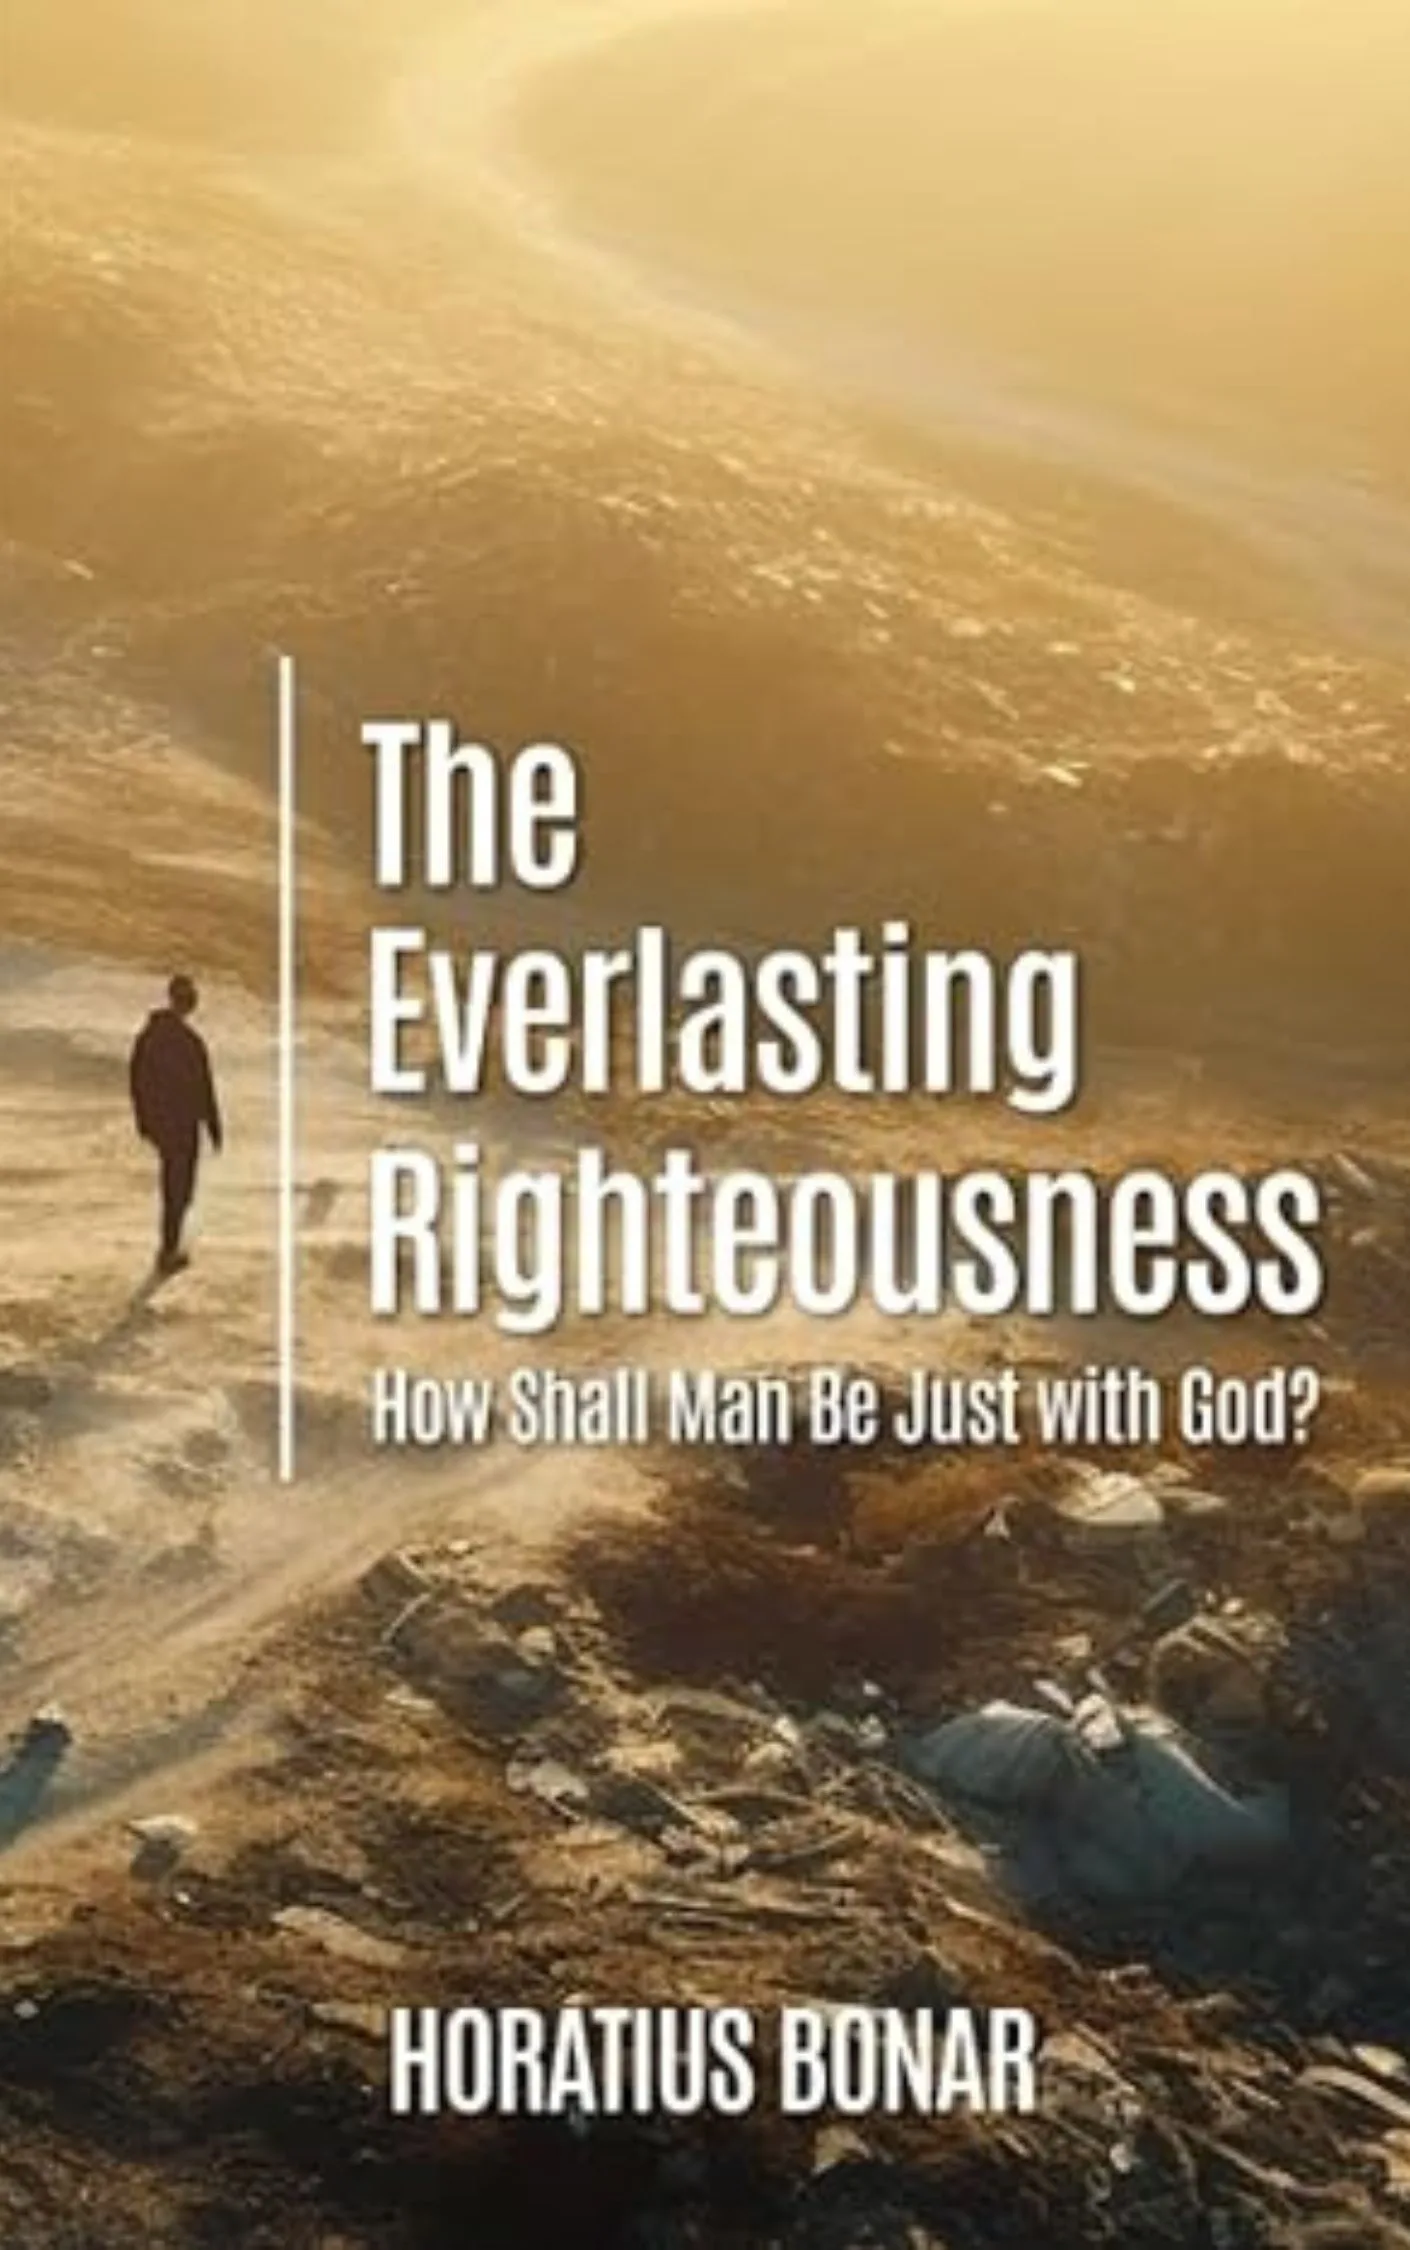 The Everlasting Righteousness: How Shall Man Be Just with God? by Horatius Bonar